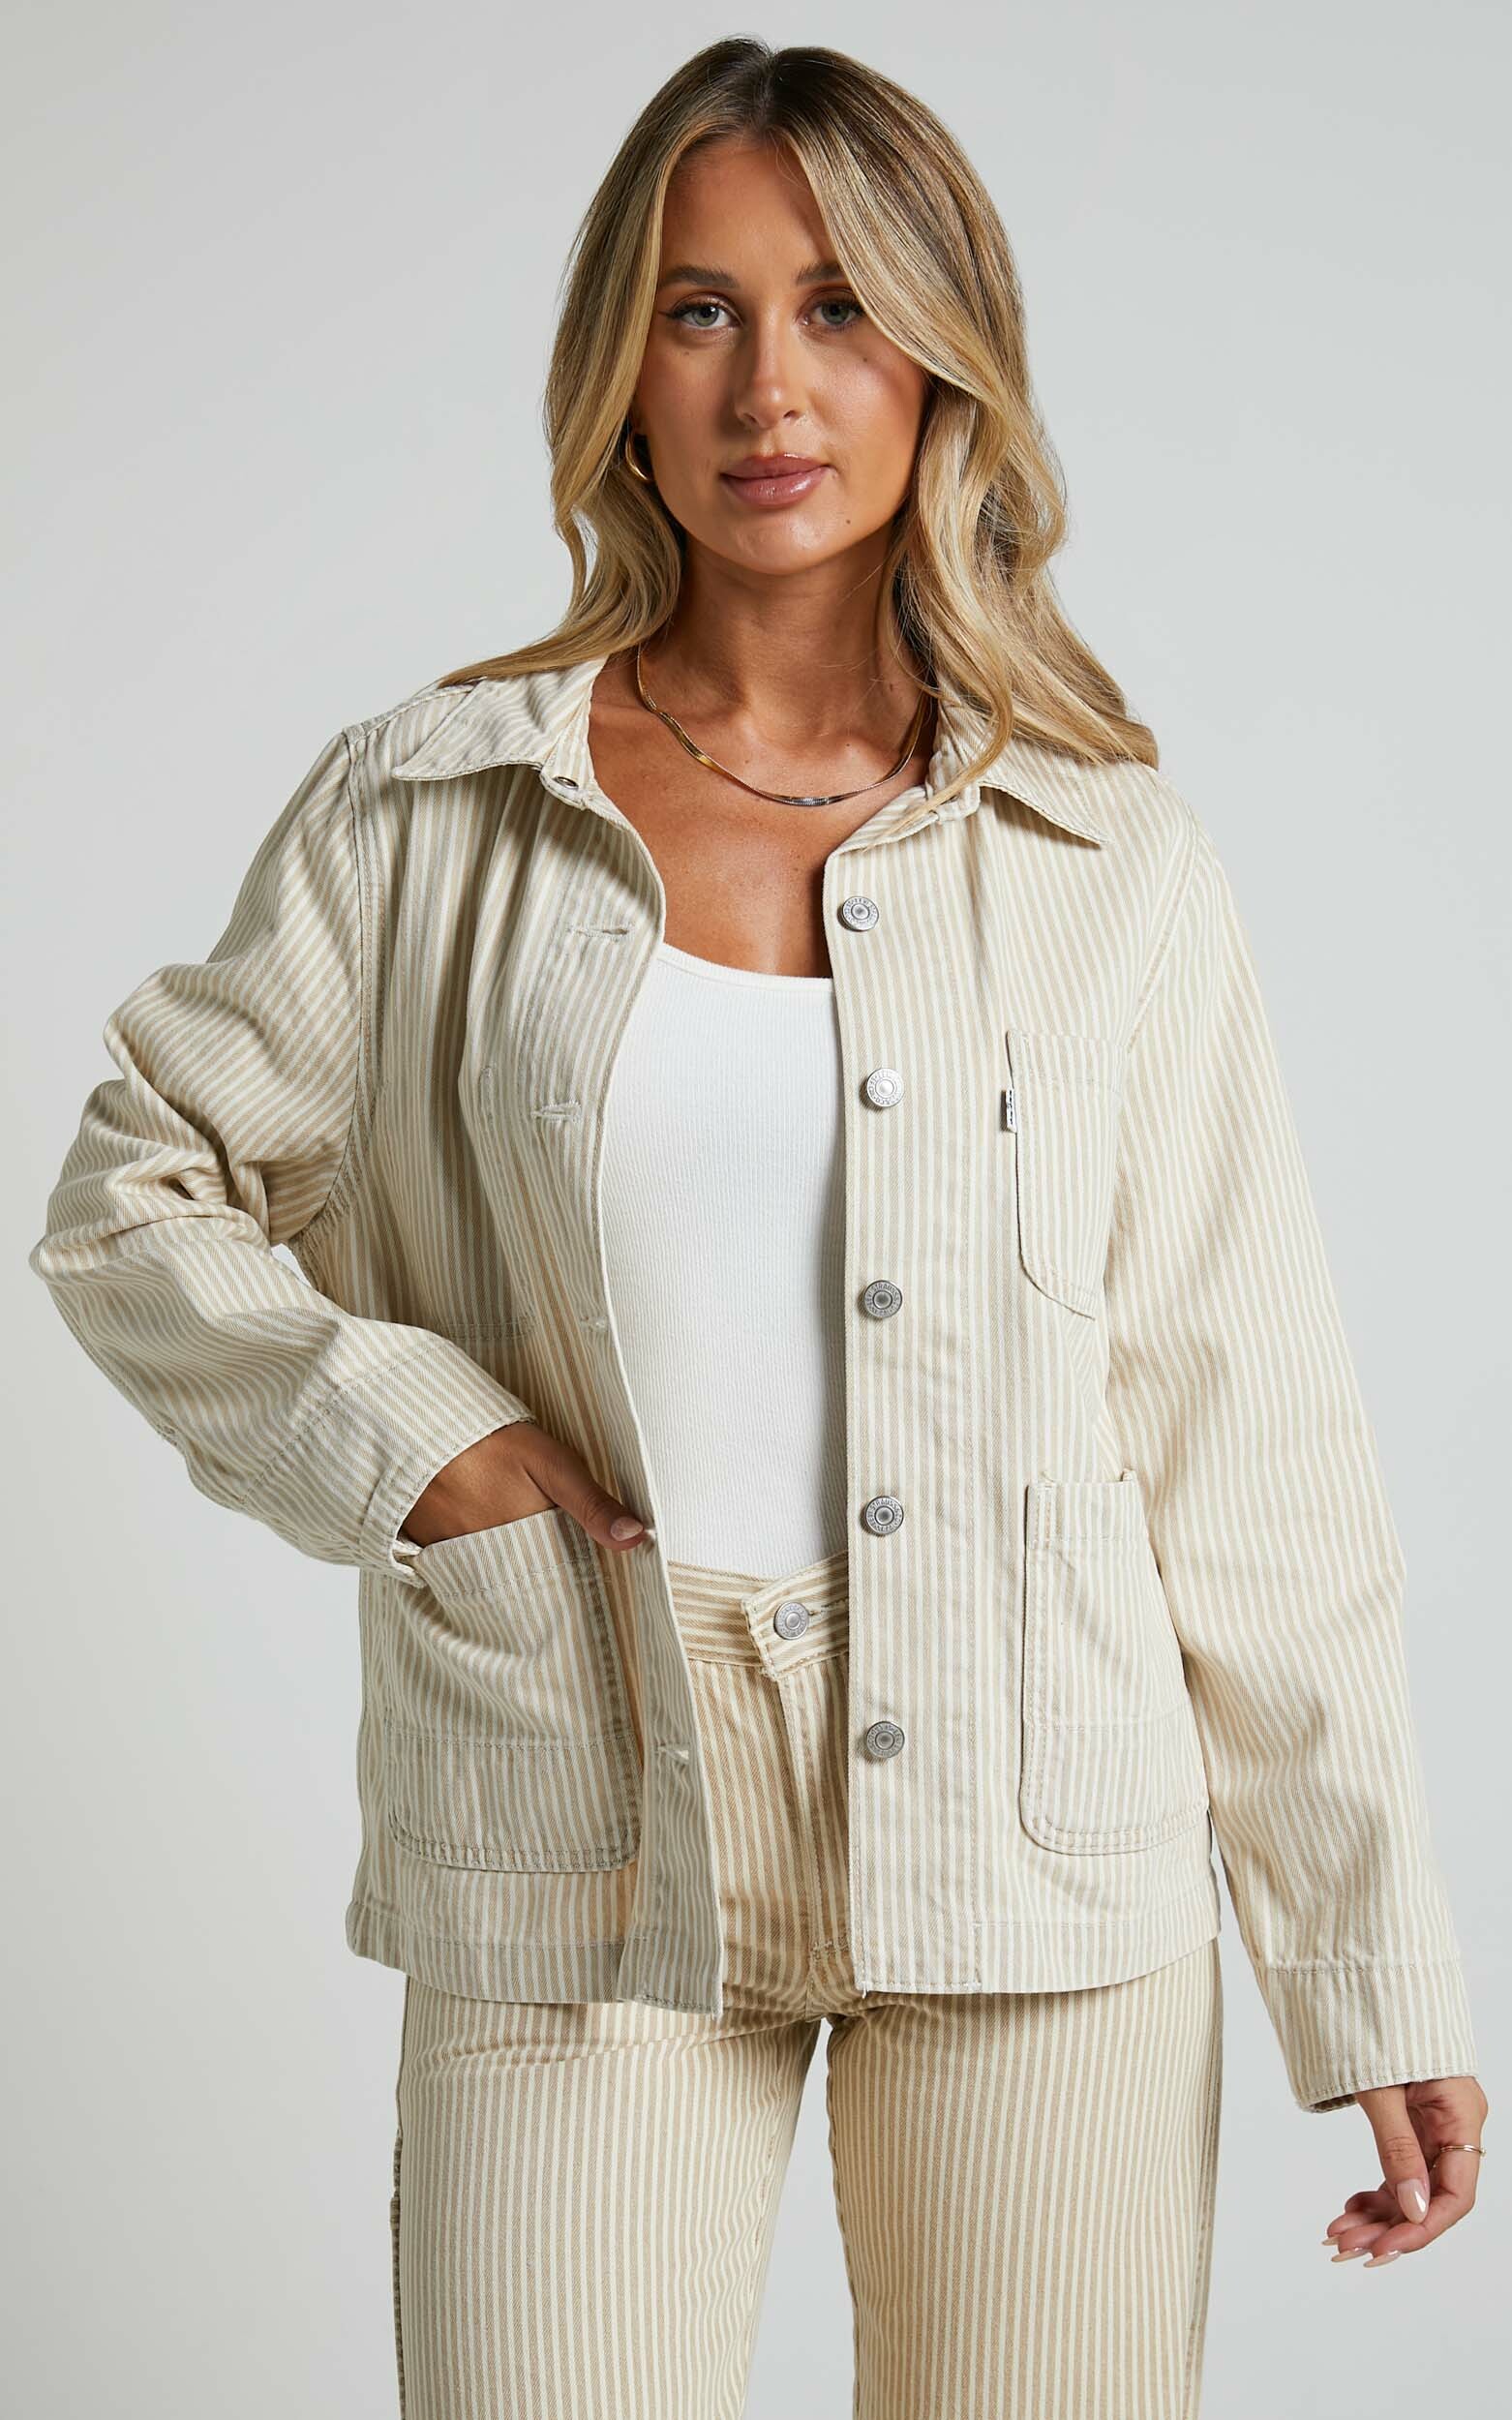 Levi's - UTILITY CHORE JACKET in Lines In The Sand Trucker - XS, WHT1, hi-res image number null